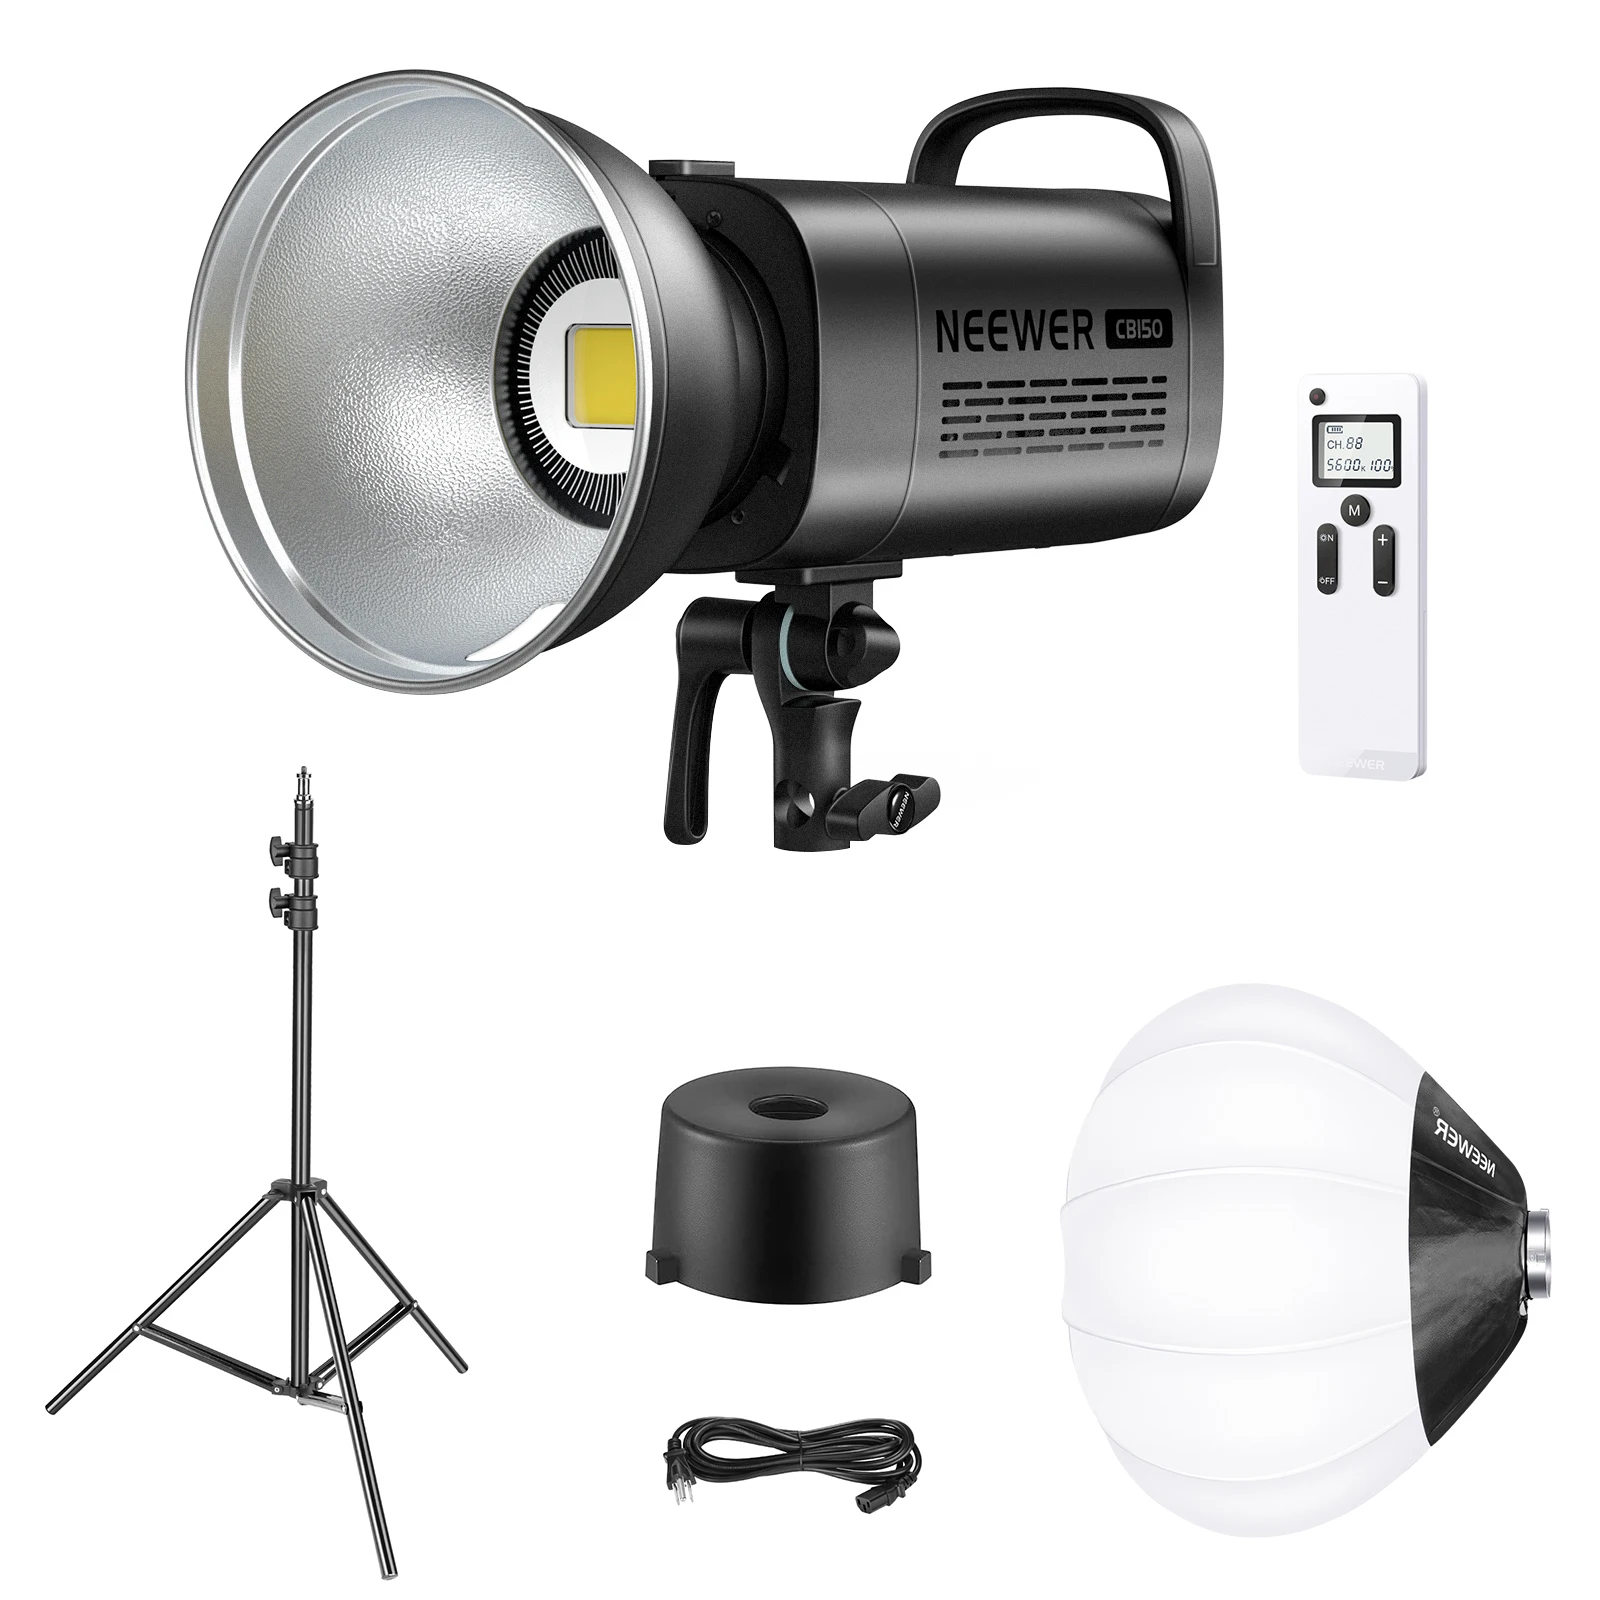 

Neewer LED Video Light, 5600K LED Continuous Light Kit With Bowens Mount, 2.4G Remote, Lantern Softbox, Stand, CRI 97+, TLCI 97+